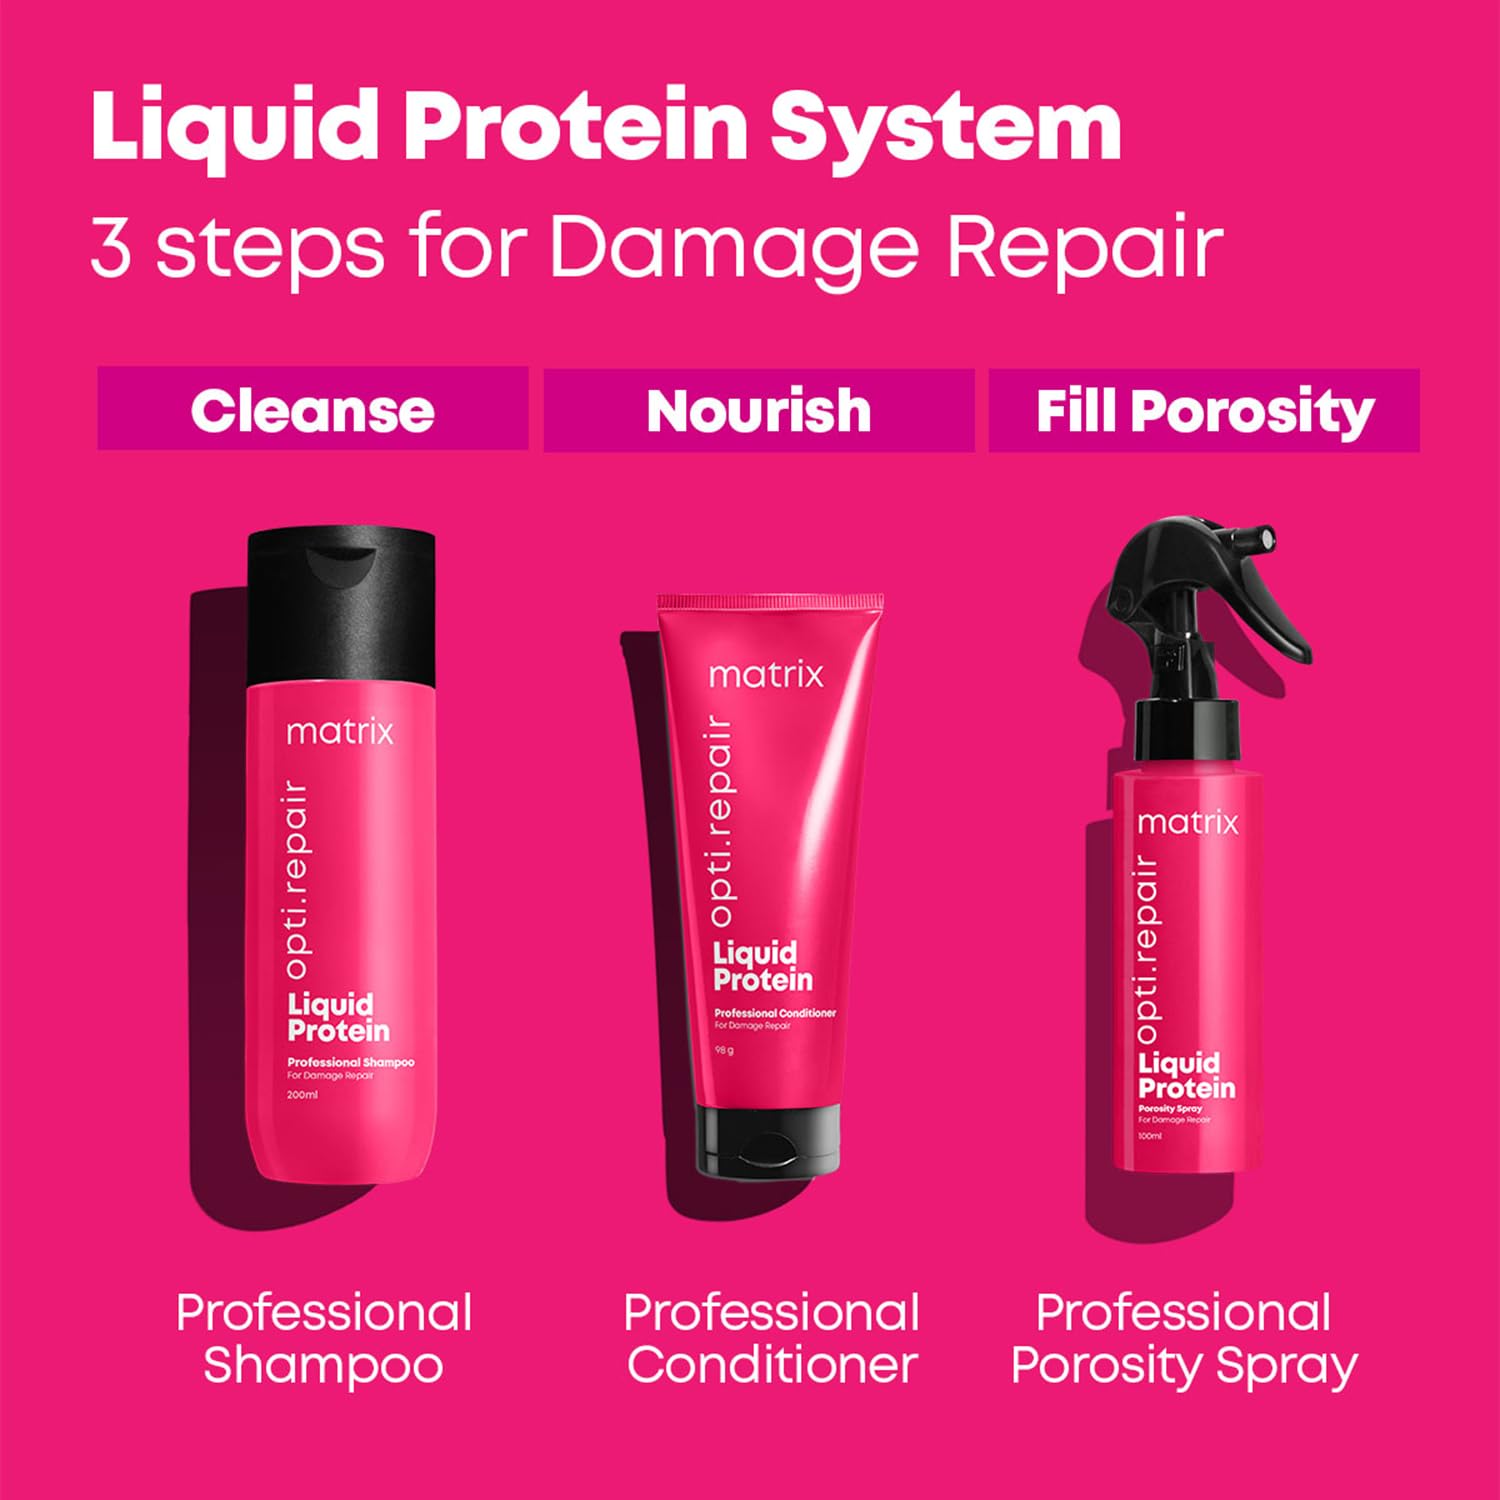 Matrix Opti.Repair Professional Liquid Protein Shampoo | Repairs Damage from 1st Use | for Less Split Ends, Breakage, Knotting | Paraben-free, 350ml  from Matrix